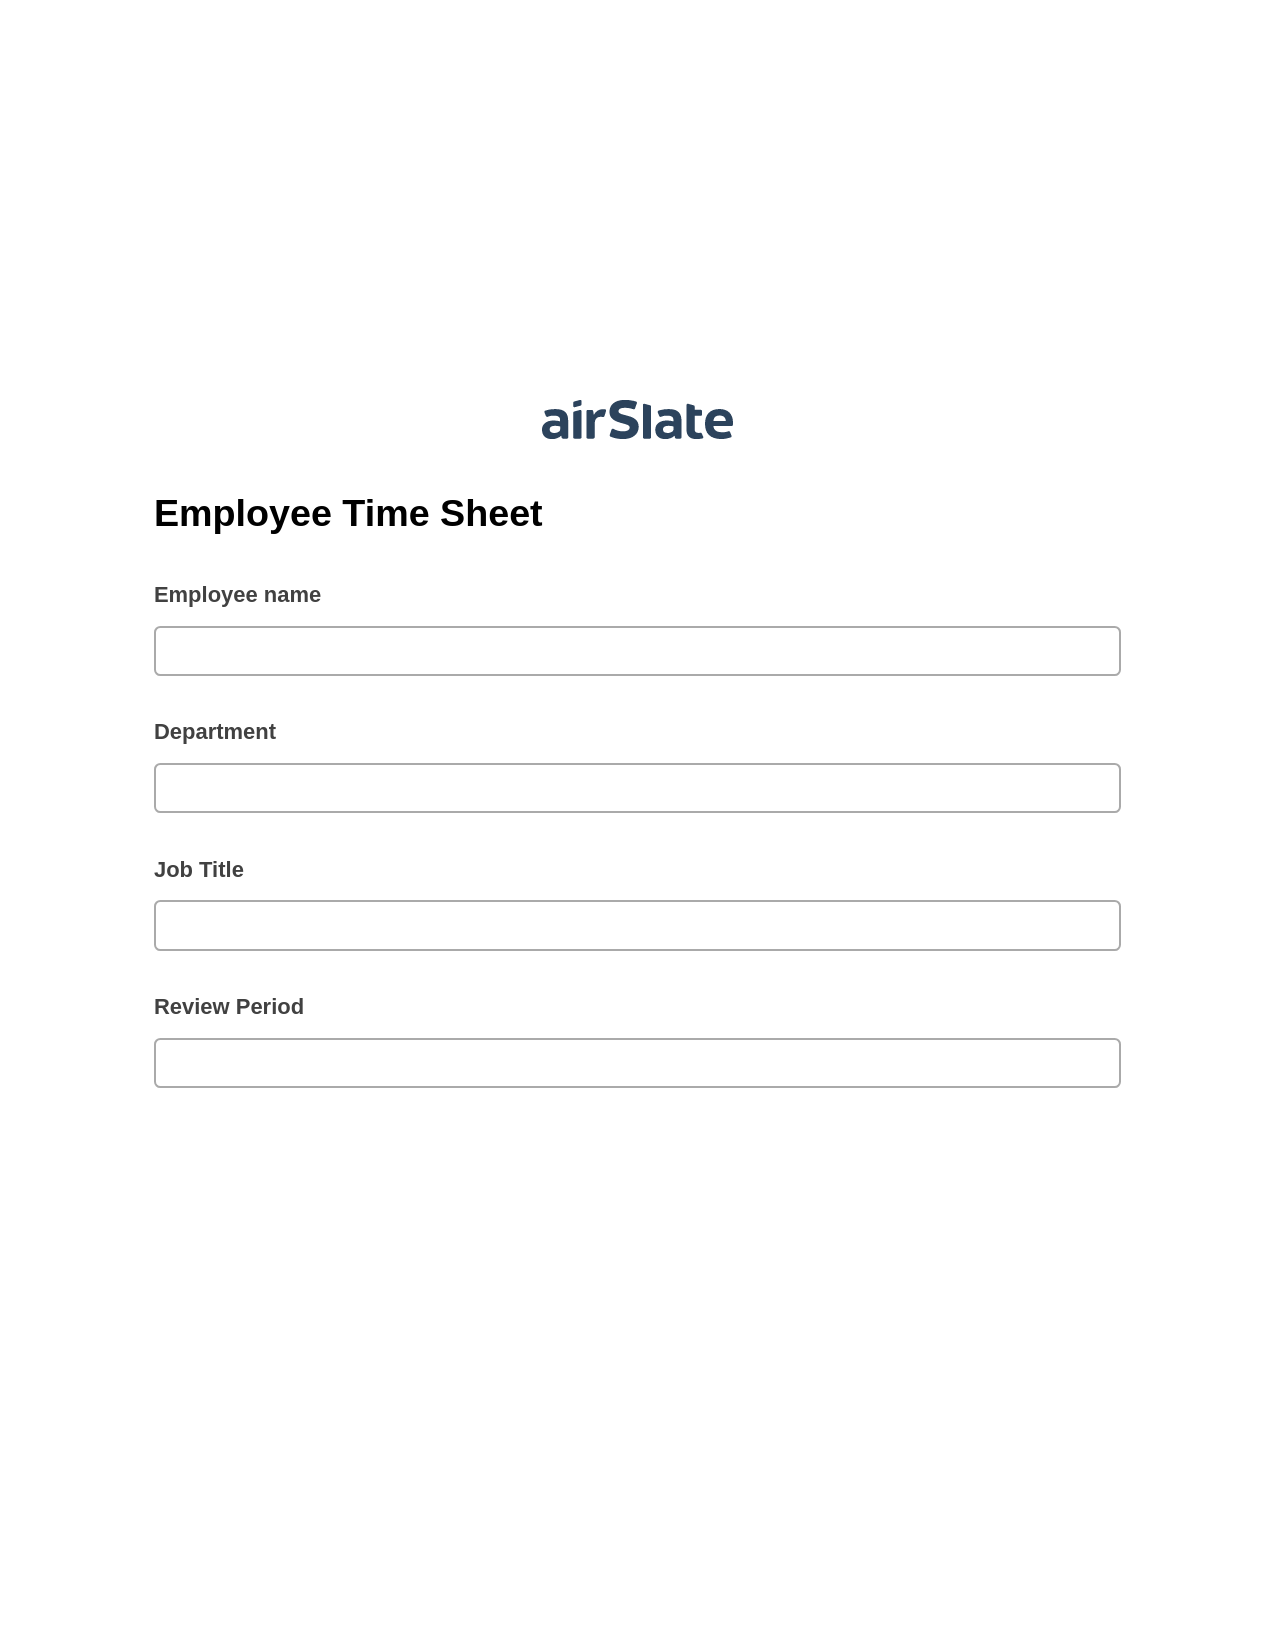 Multirole Employee Time Sheet Pre-fill Dropdowns from Google Sheet Bot, Lock the Slate Bot, Export to Excel 365 Bot